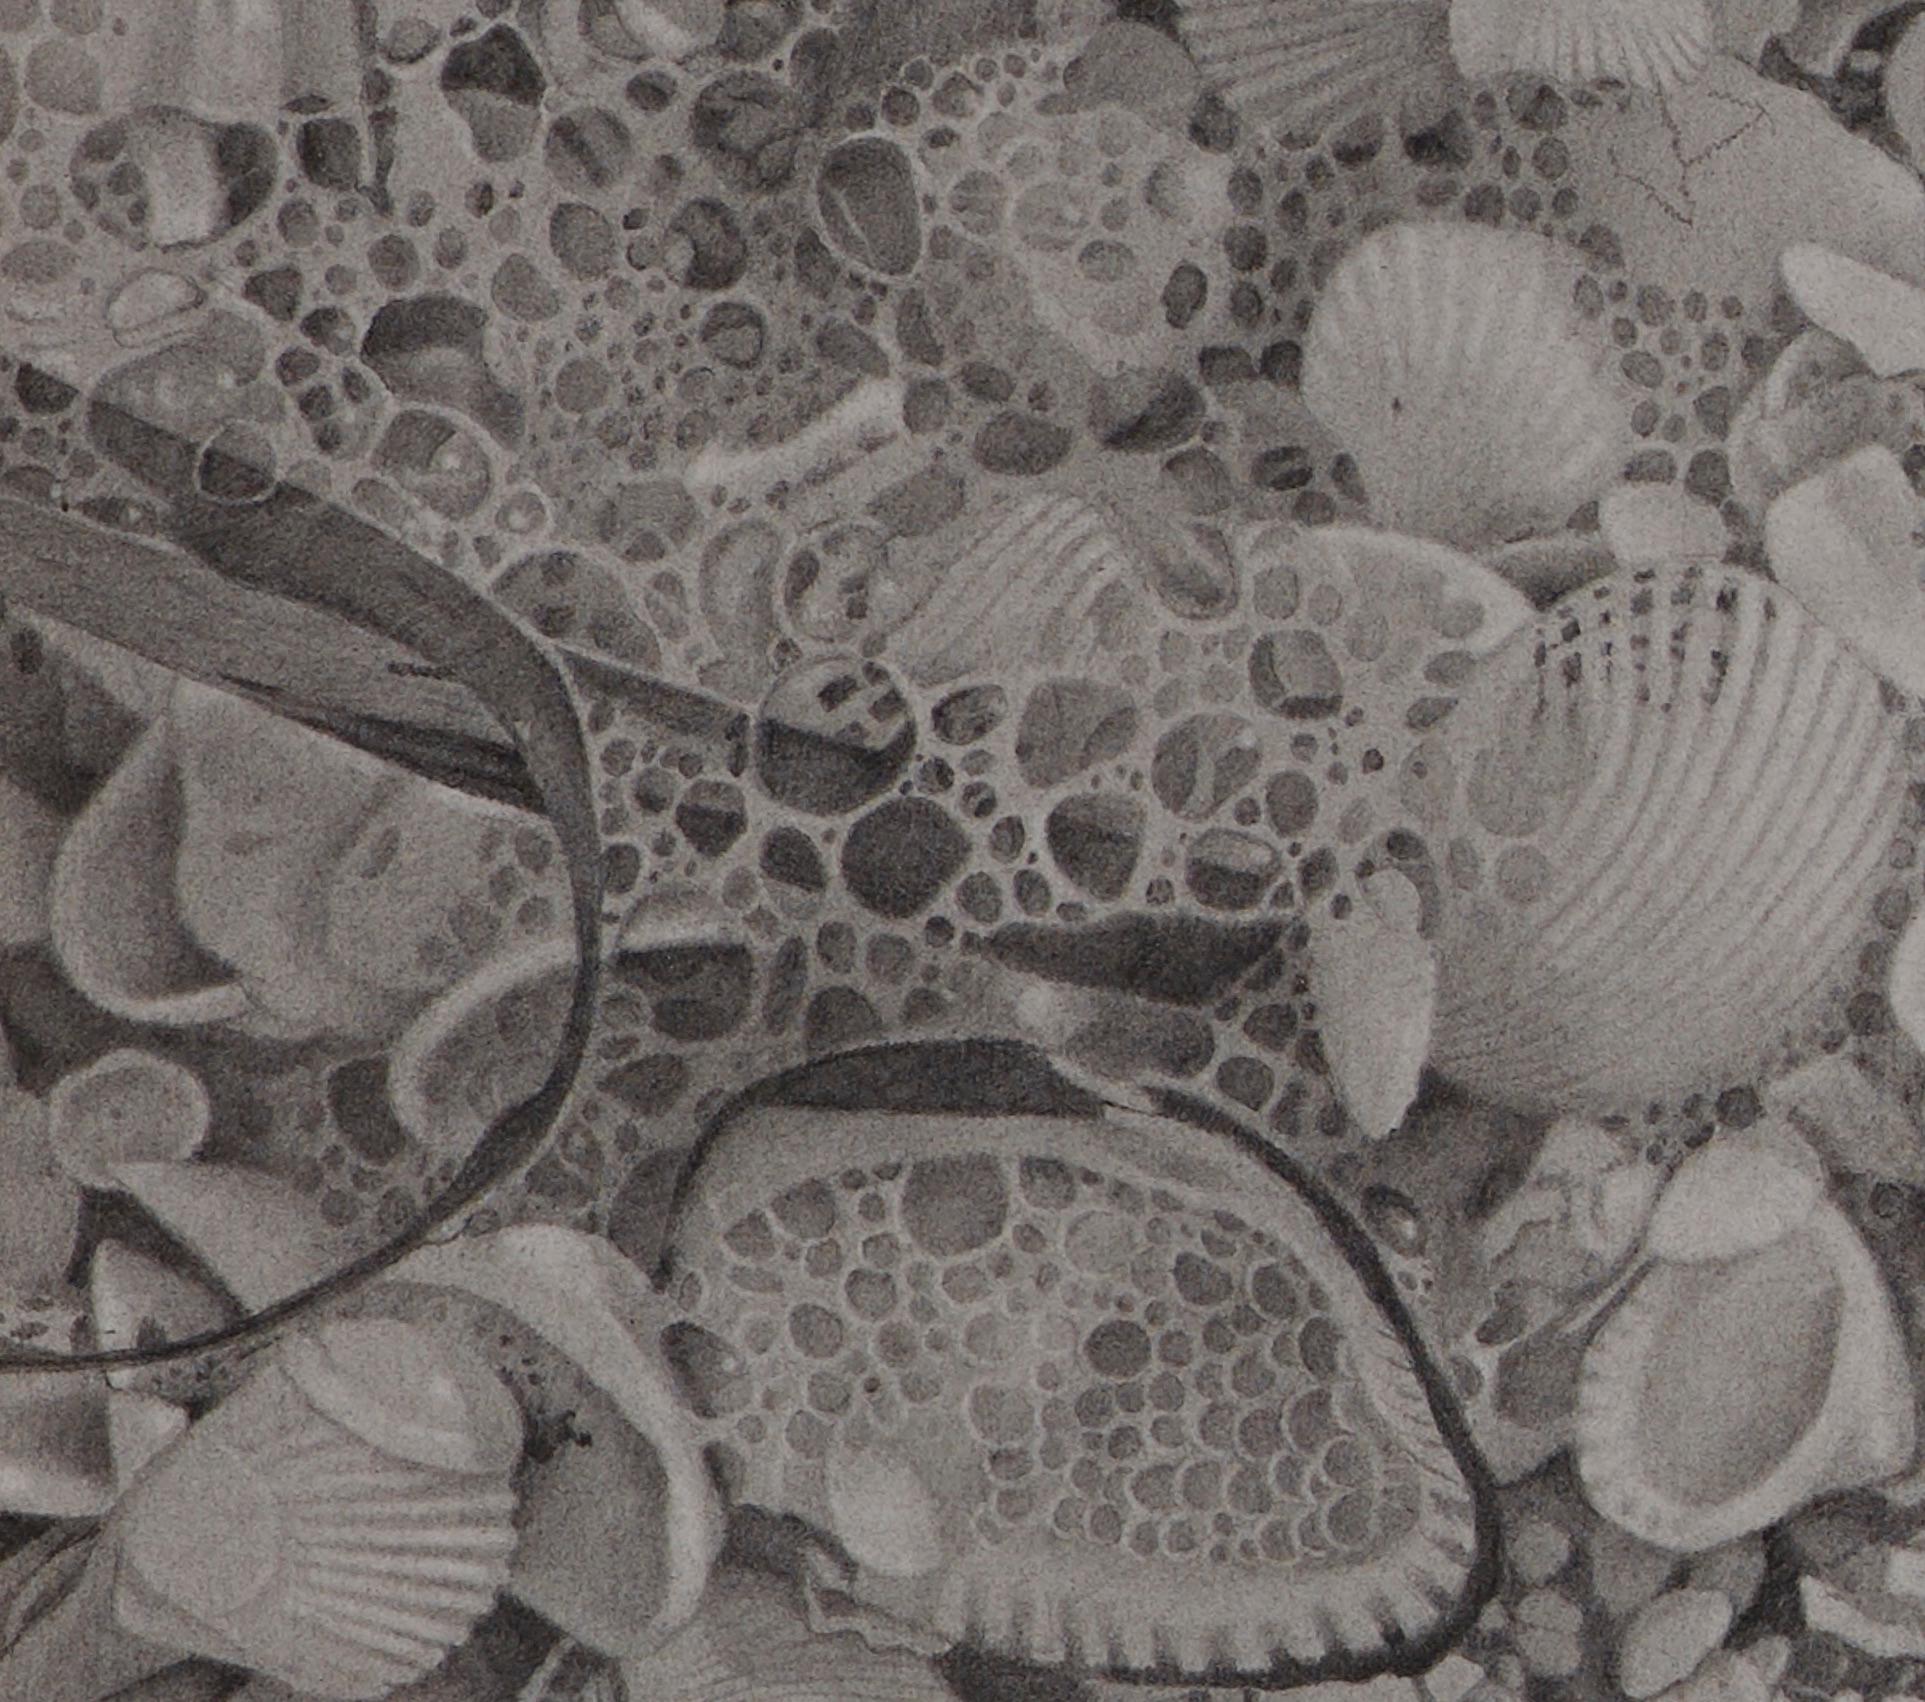 Seashells 3, photorealist graphite nature drawing, 2018 - Art by Mary Reilly